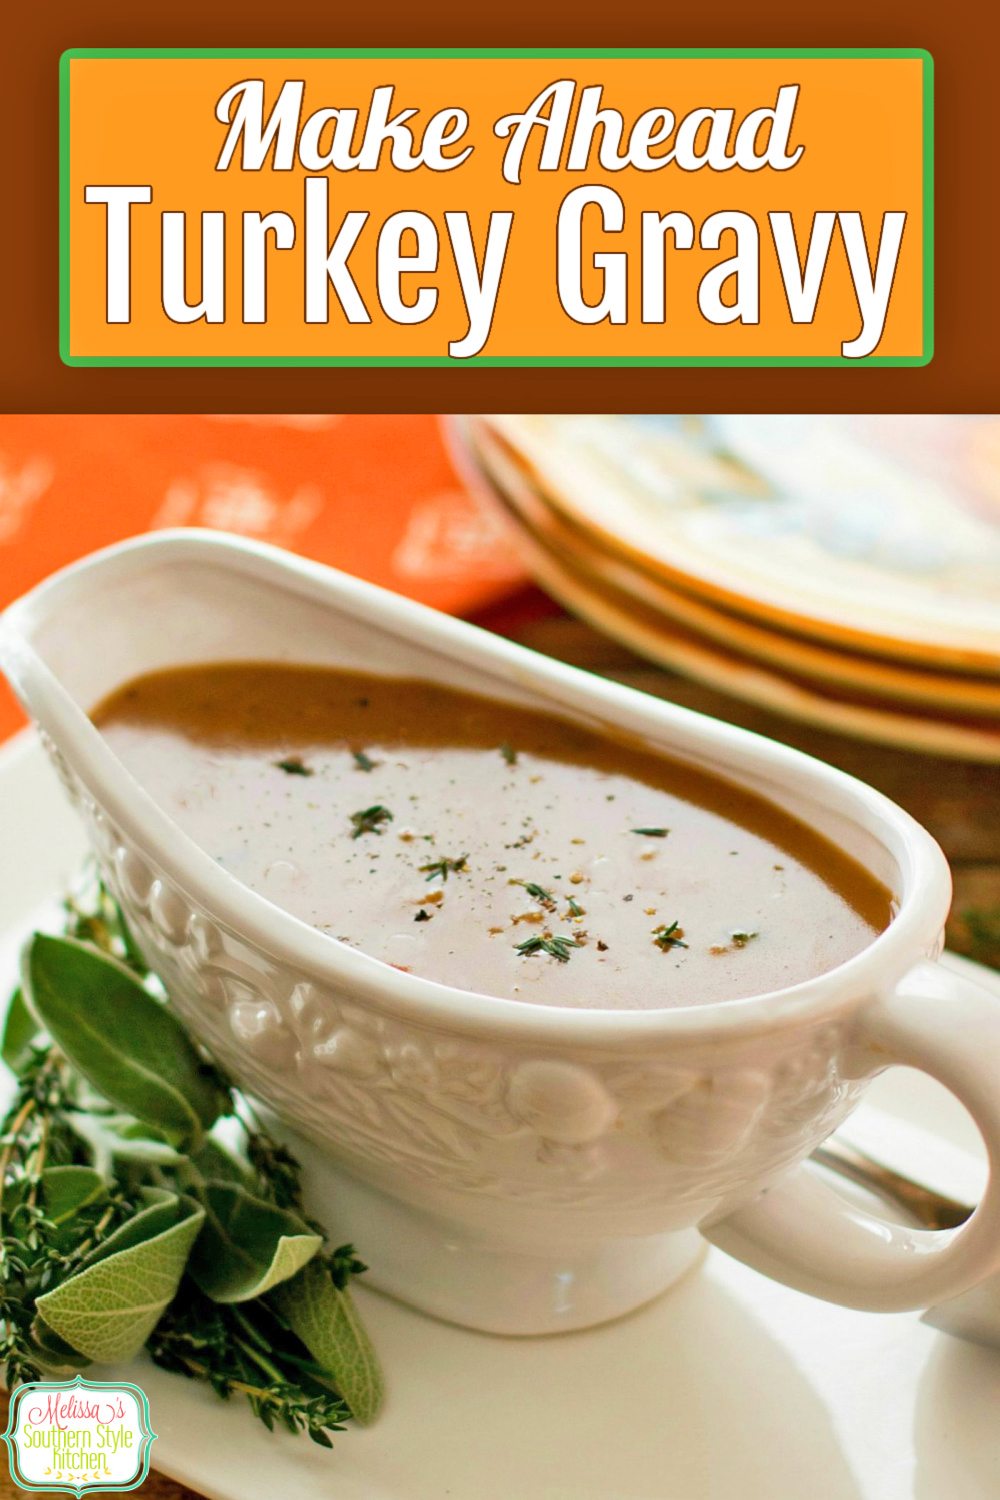 Take the stress out of Thanksgiving and make this spectacular Turkey Gravy in advance #turkeygravy #turkey #gravy #makeaheadgravy #gravyrecipes #turkey #turkeyrecipes #thanksgivingrecipes #thanksgiving #fall #fallrecipes #soujthernfood #southernrecipes via @melissasssk